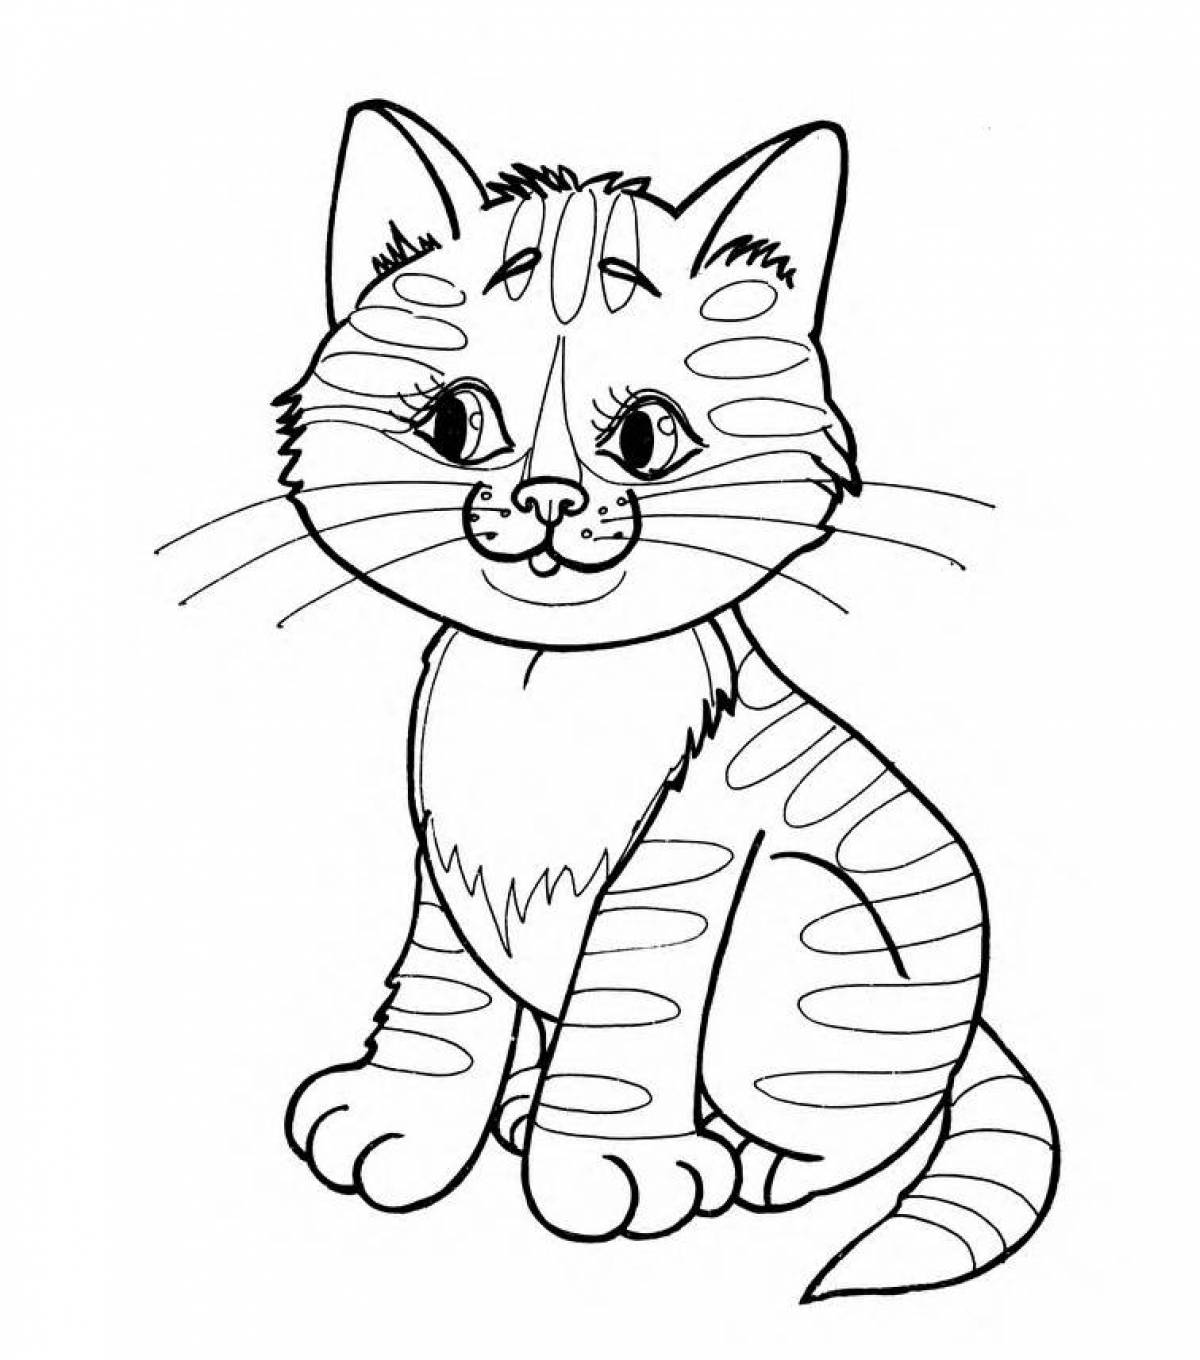 Violent coloring cat for children 6-7 years old